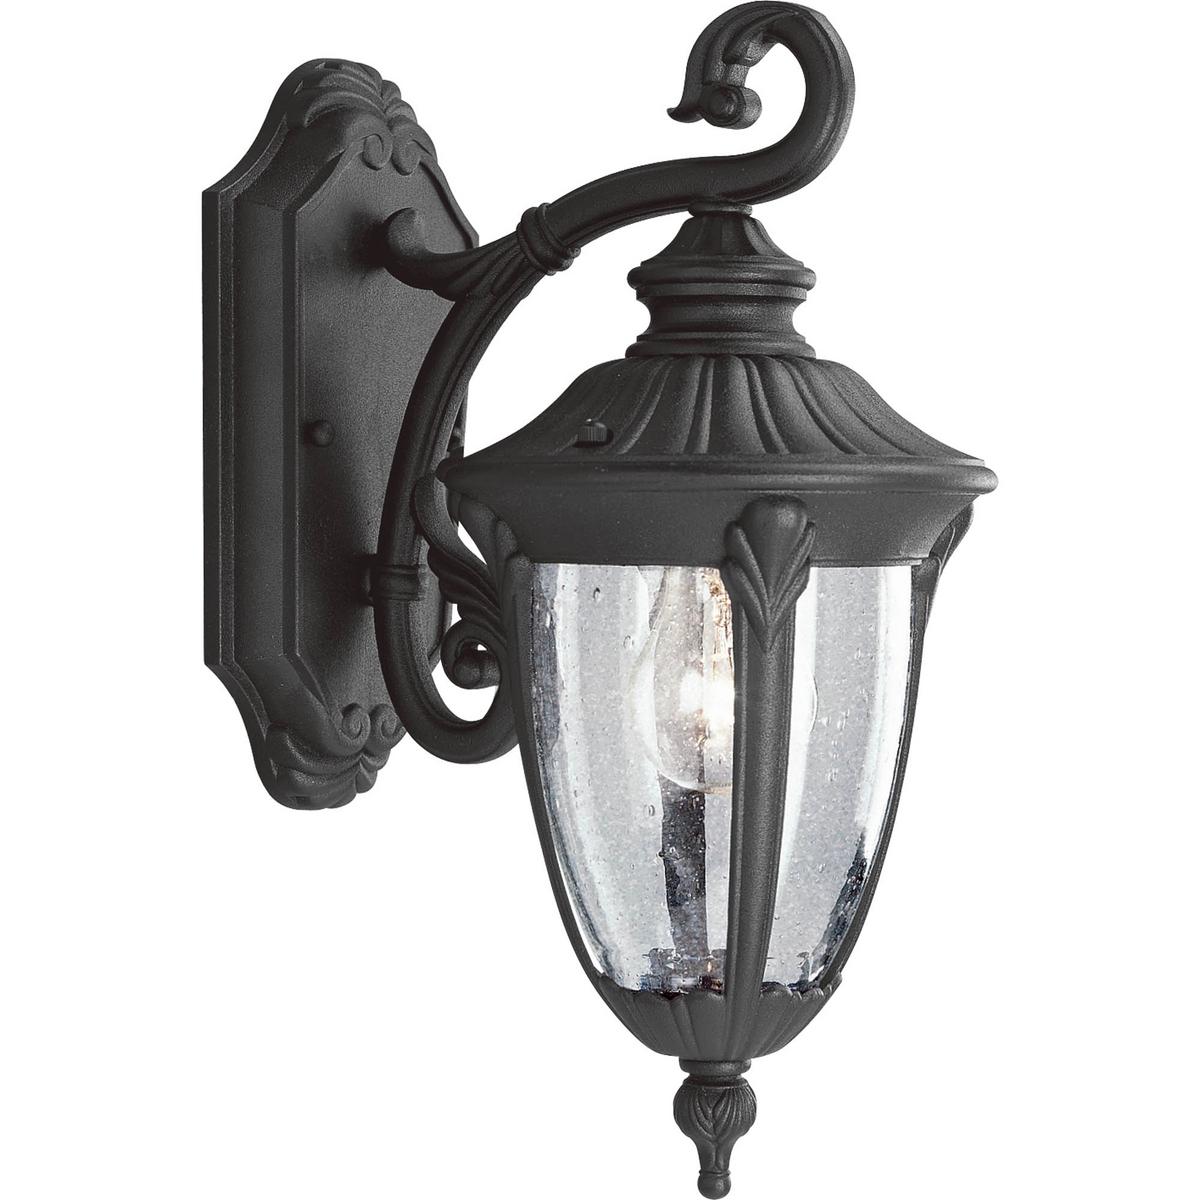 Hubbell P5820-31 The Meridian Collection features decorative shepherd hooks and acanthus cast arms. Clear, seed glass urns finishes off the distinctive and stately feeling of old world elegance. The one-light cast aluminum small wall lantern has a durable Textured Black p